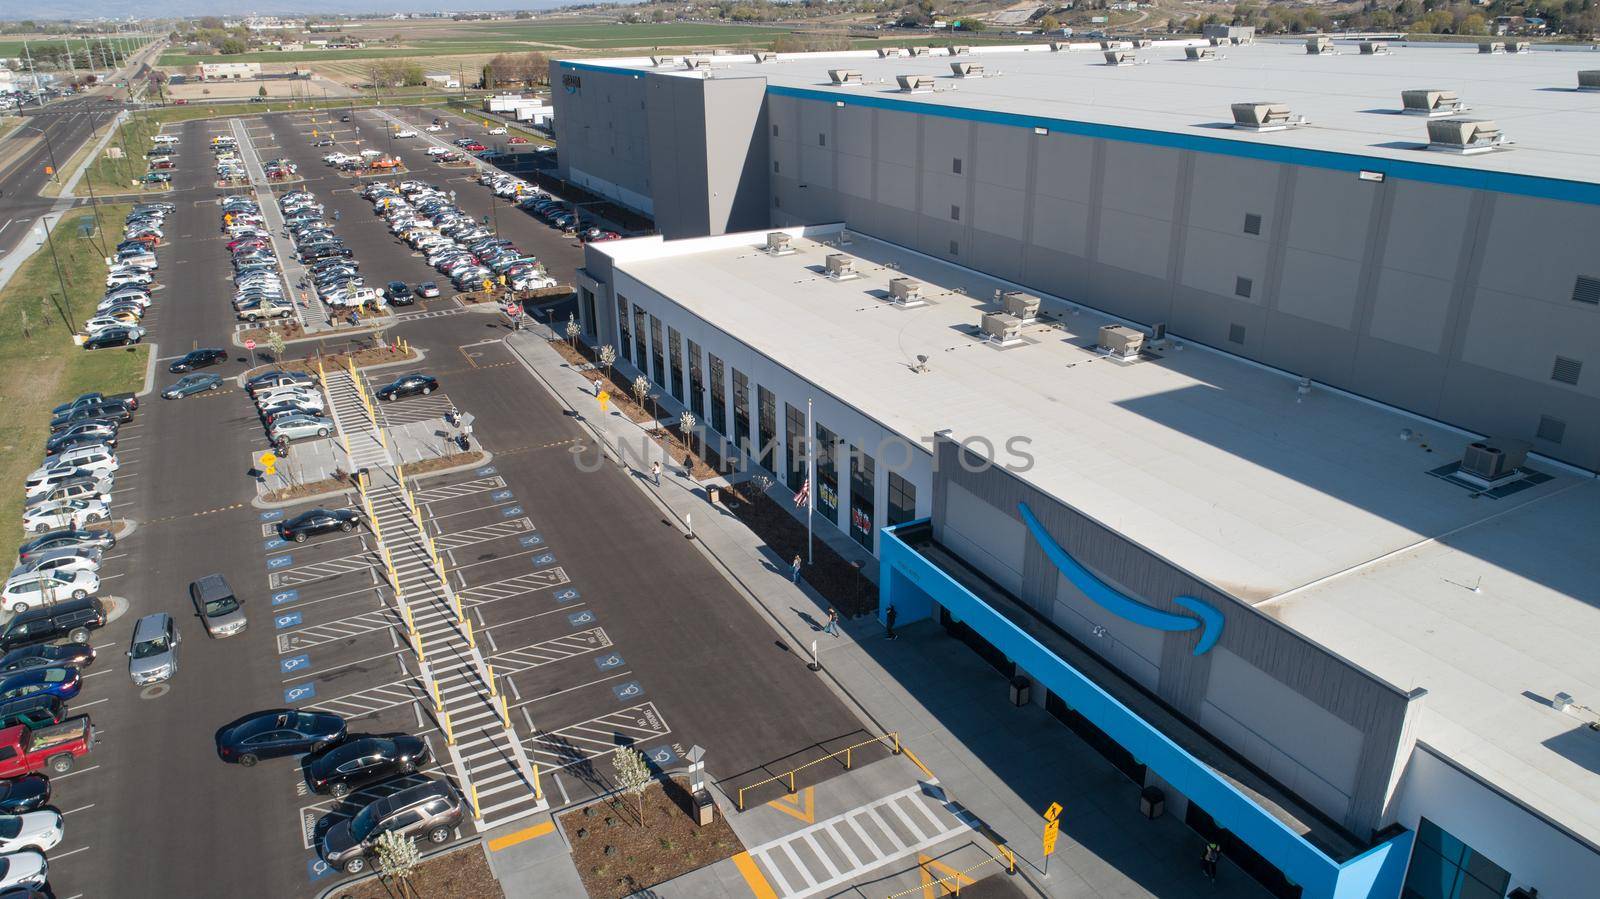 NAMPA, IDAHO - APRIL 27, 2012: Aerial view of an amazon fulfillment center with employees entering or leaving the building